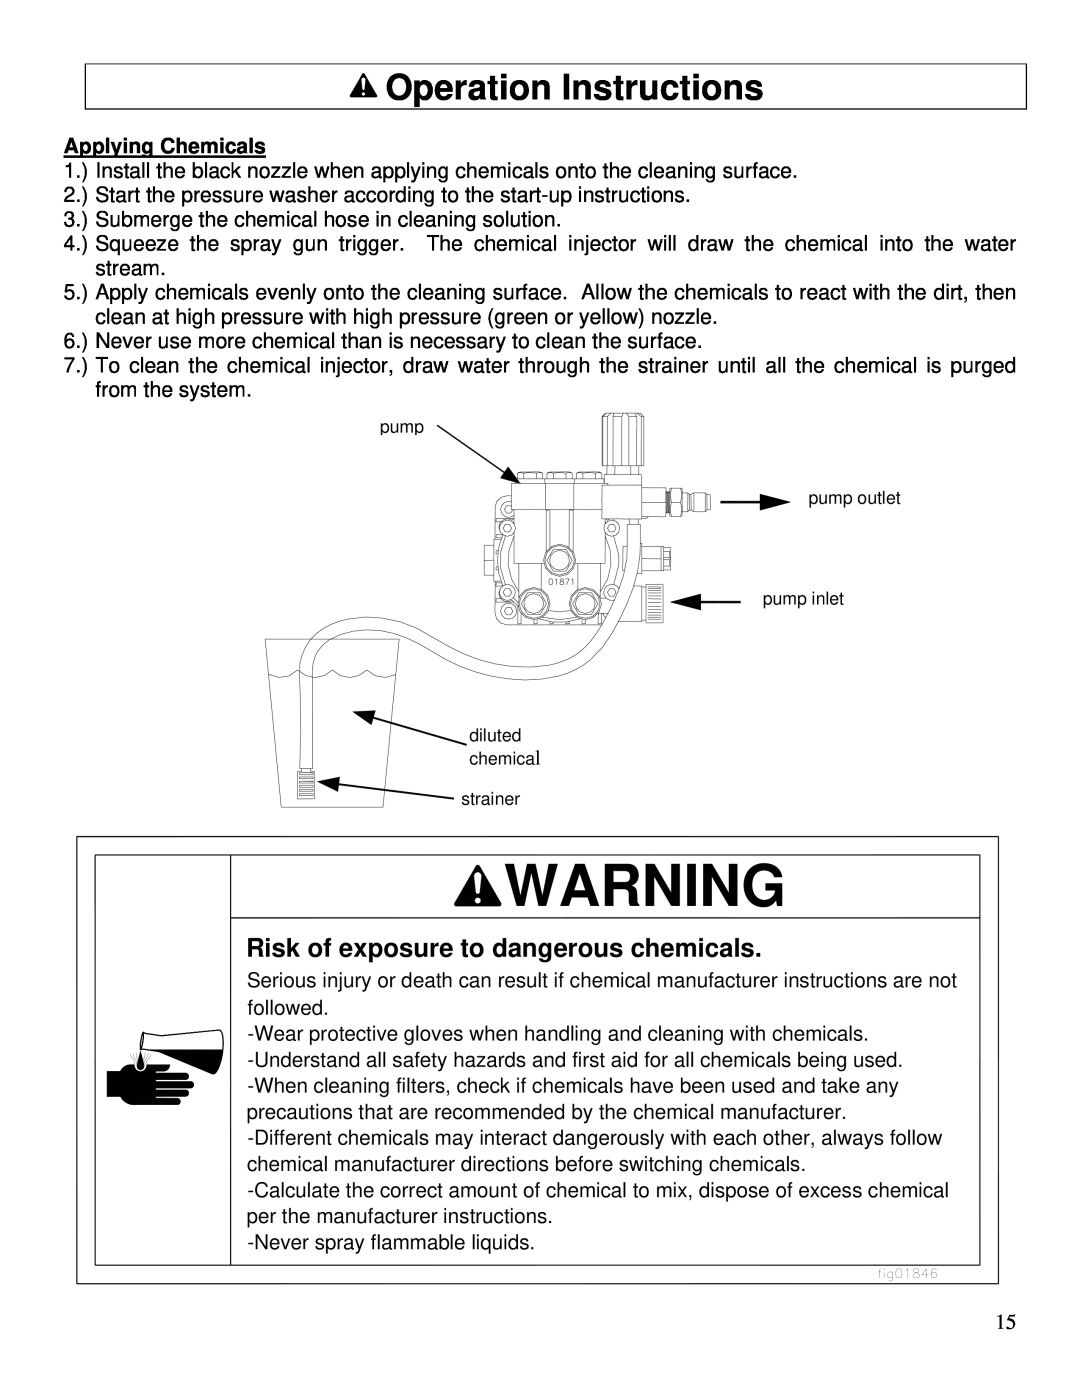 North Star M157300E owner manual Operation Instructions, Risk of exposure to dangerous chemicals, Applying Chemicals 